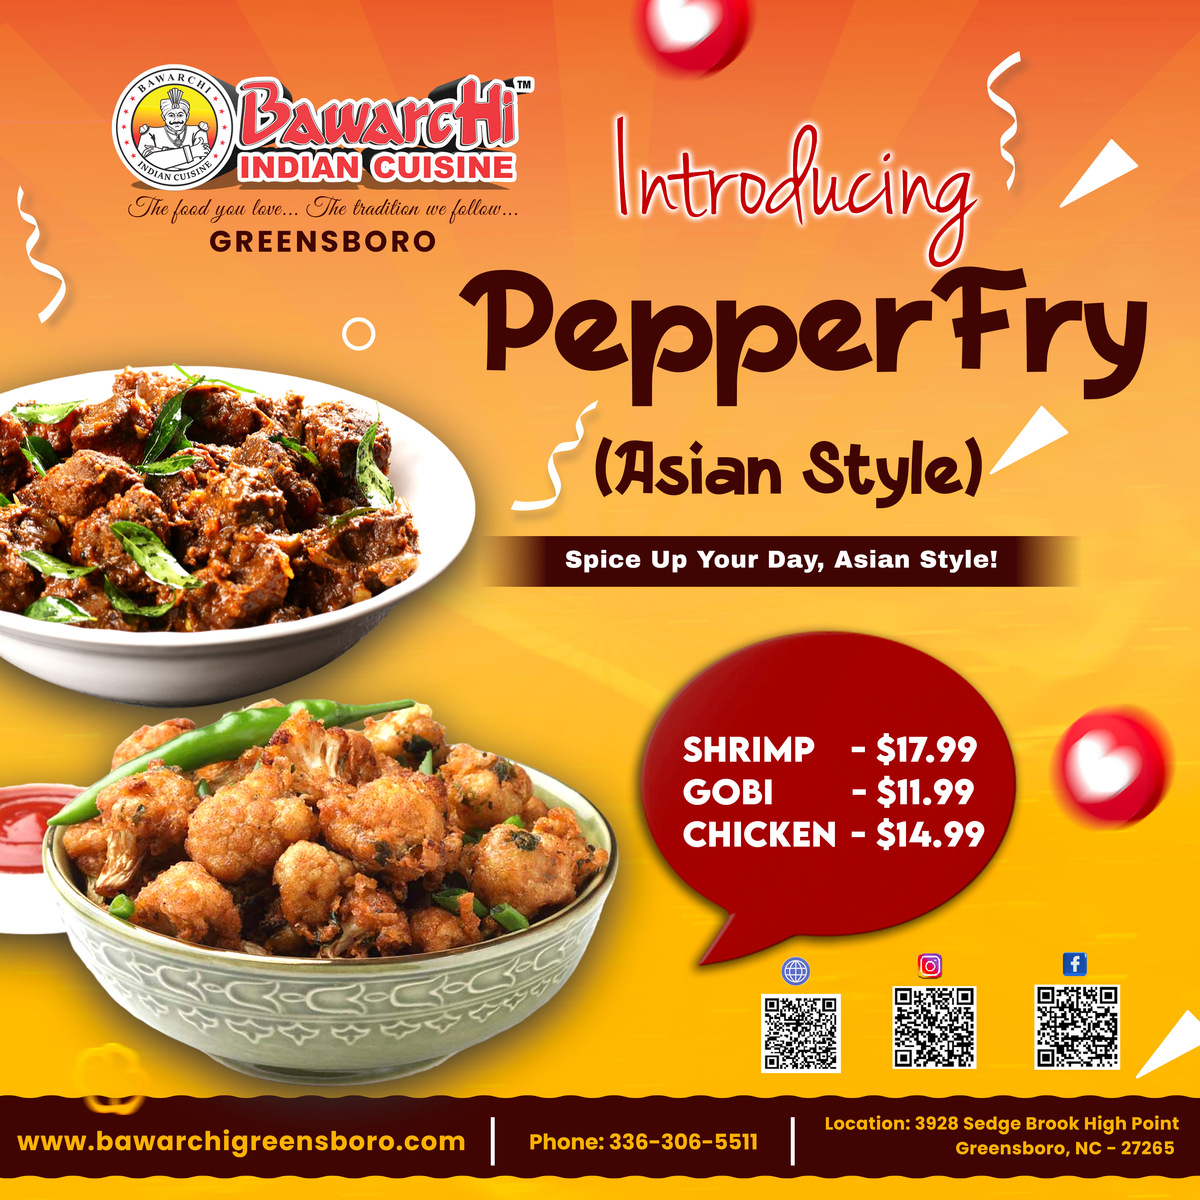 Introducing Pepper Fry